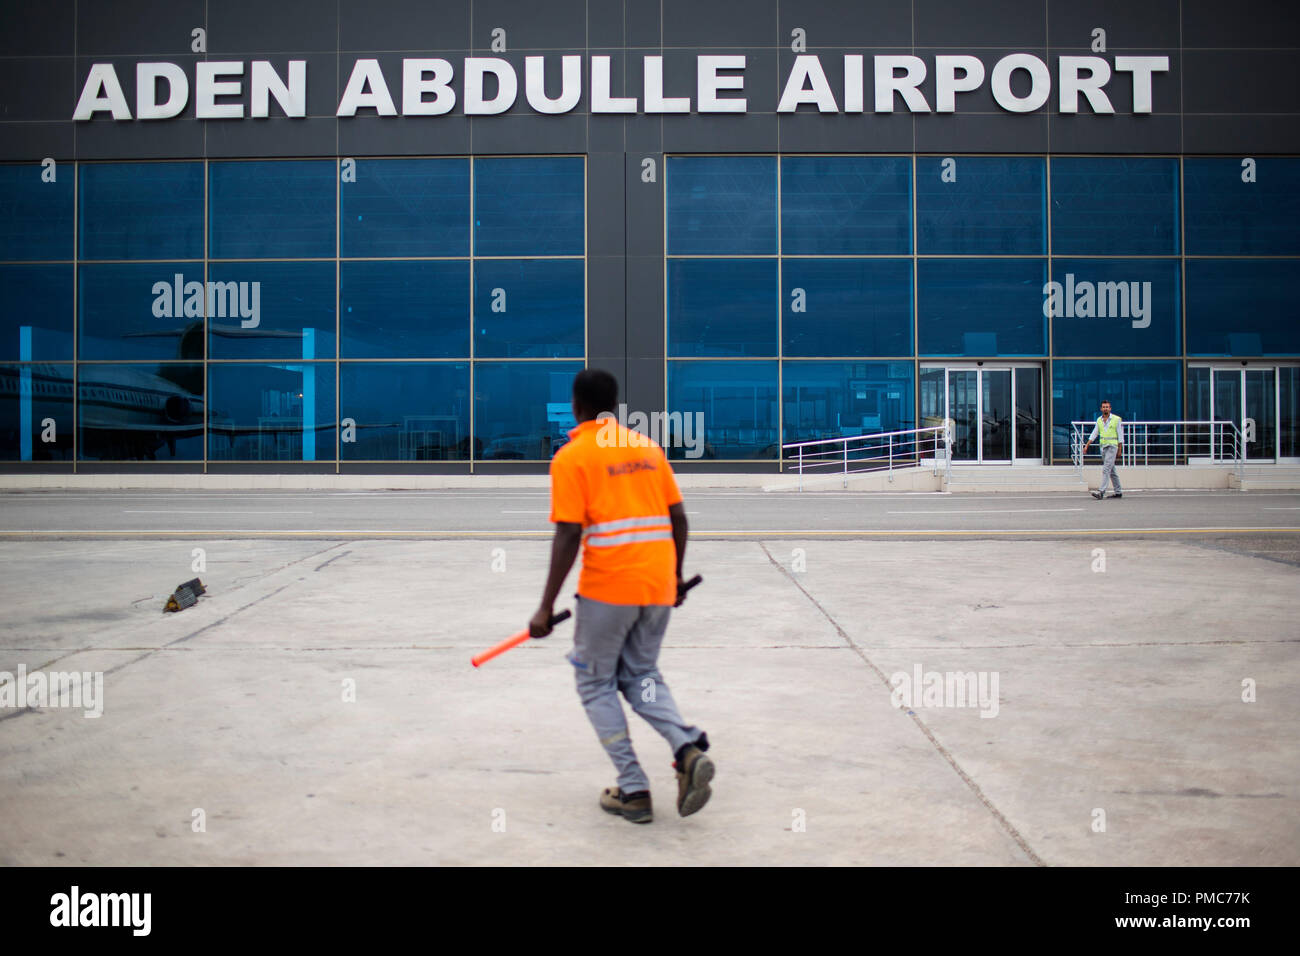 A marshaller walks through the runway by the newly built terminal of the Aden Abdulle airport inside the African Union Mission in Somalia (AMISOM) bas Stock Photo